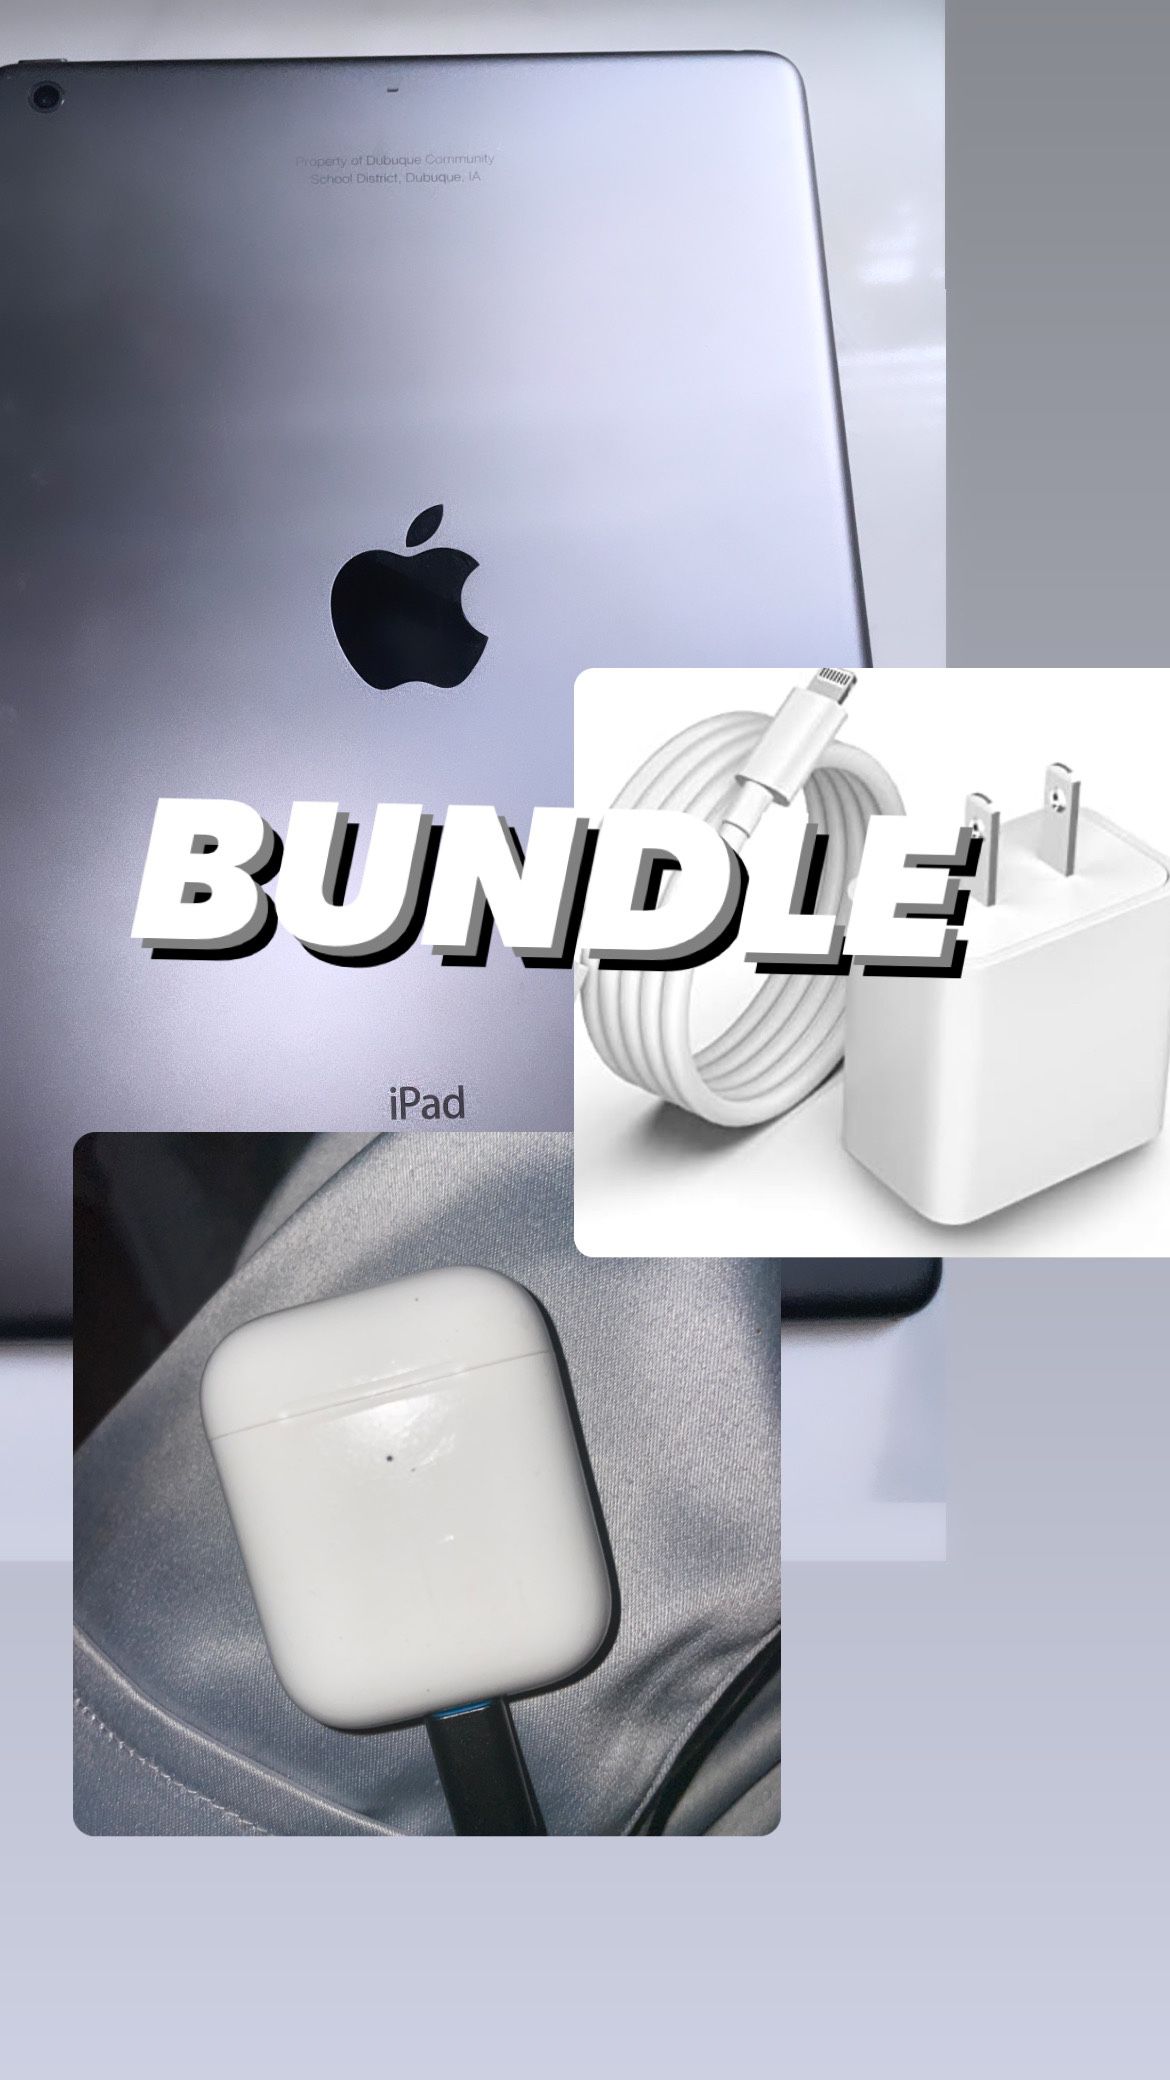 ipad air, airpod case, and charger BUNDLE 